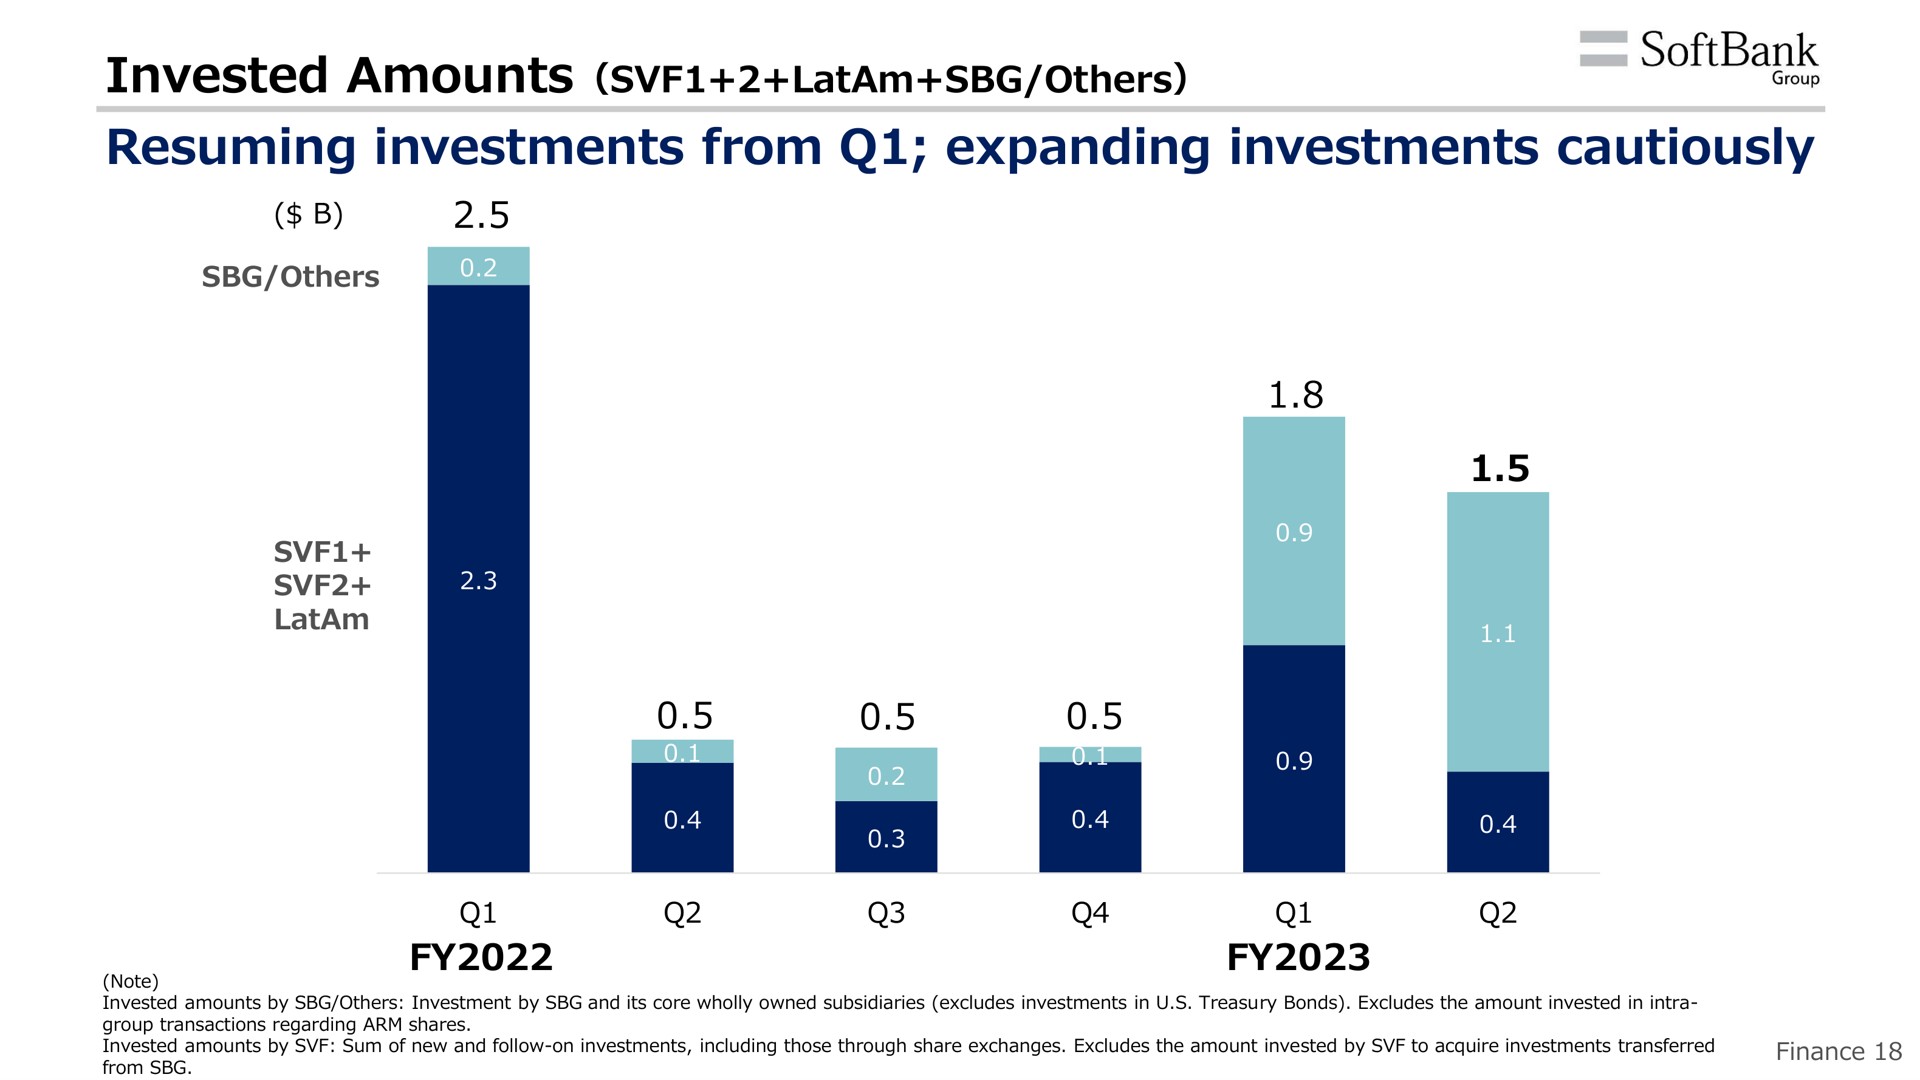 resuming investments from expanding investments cautiously invested amounts | SoftBank